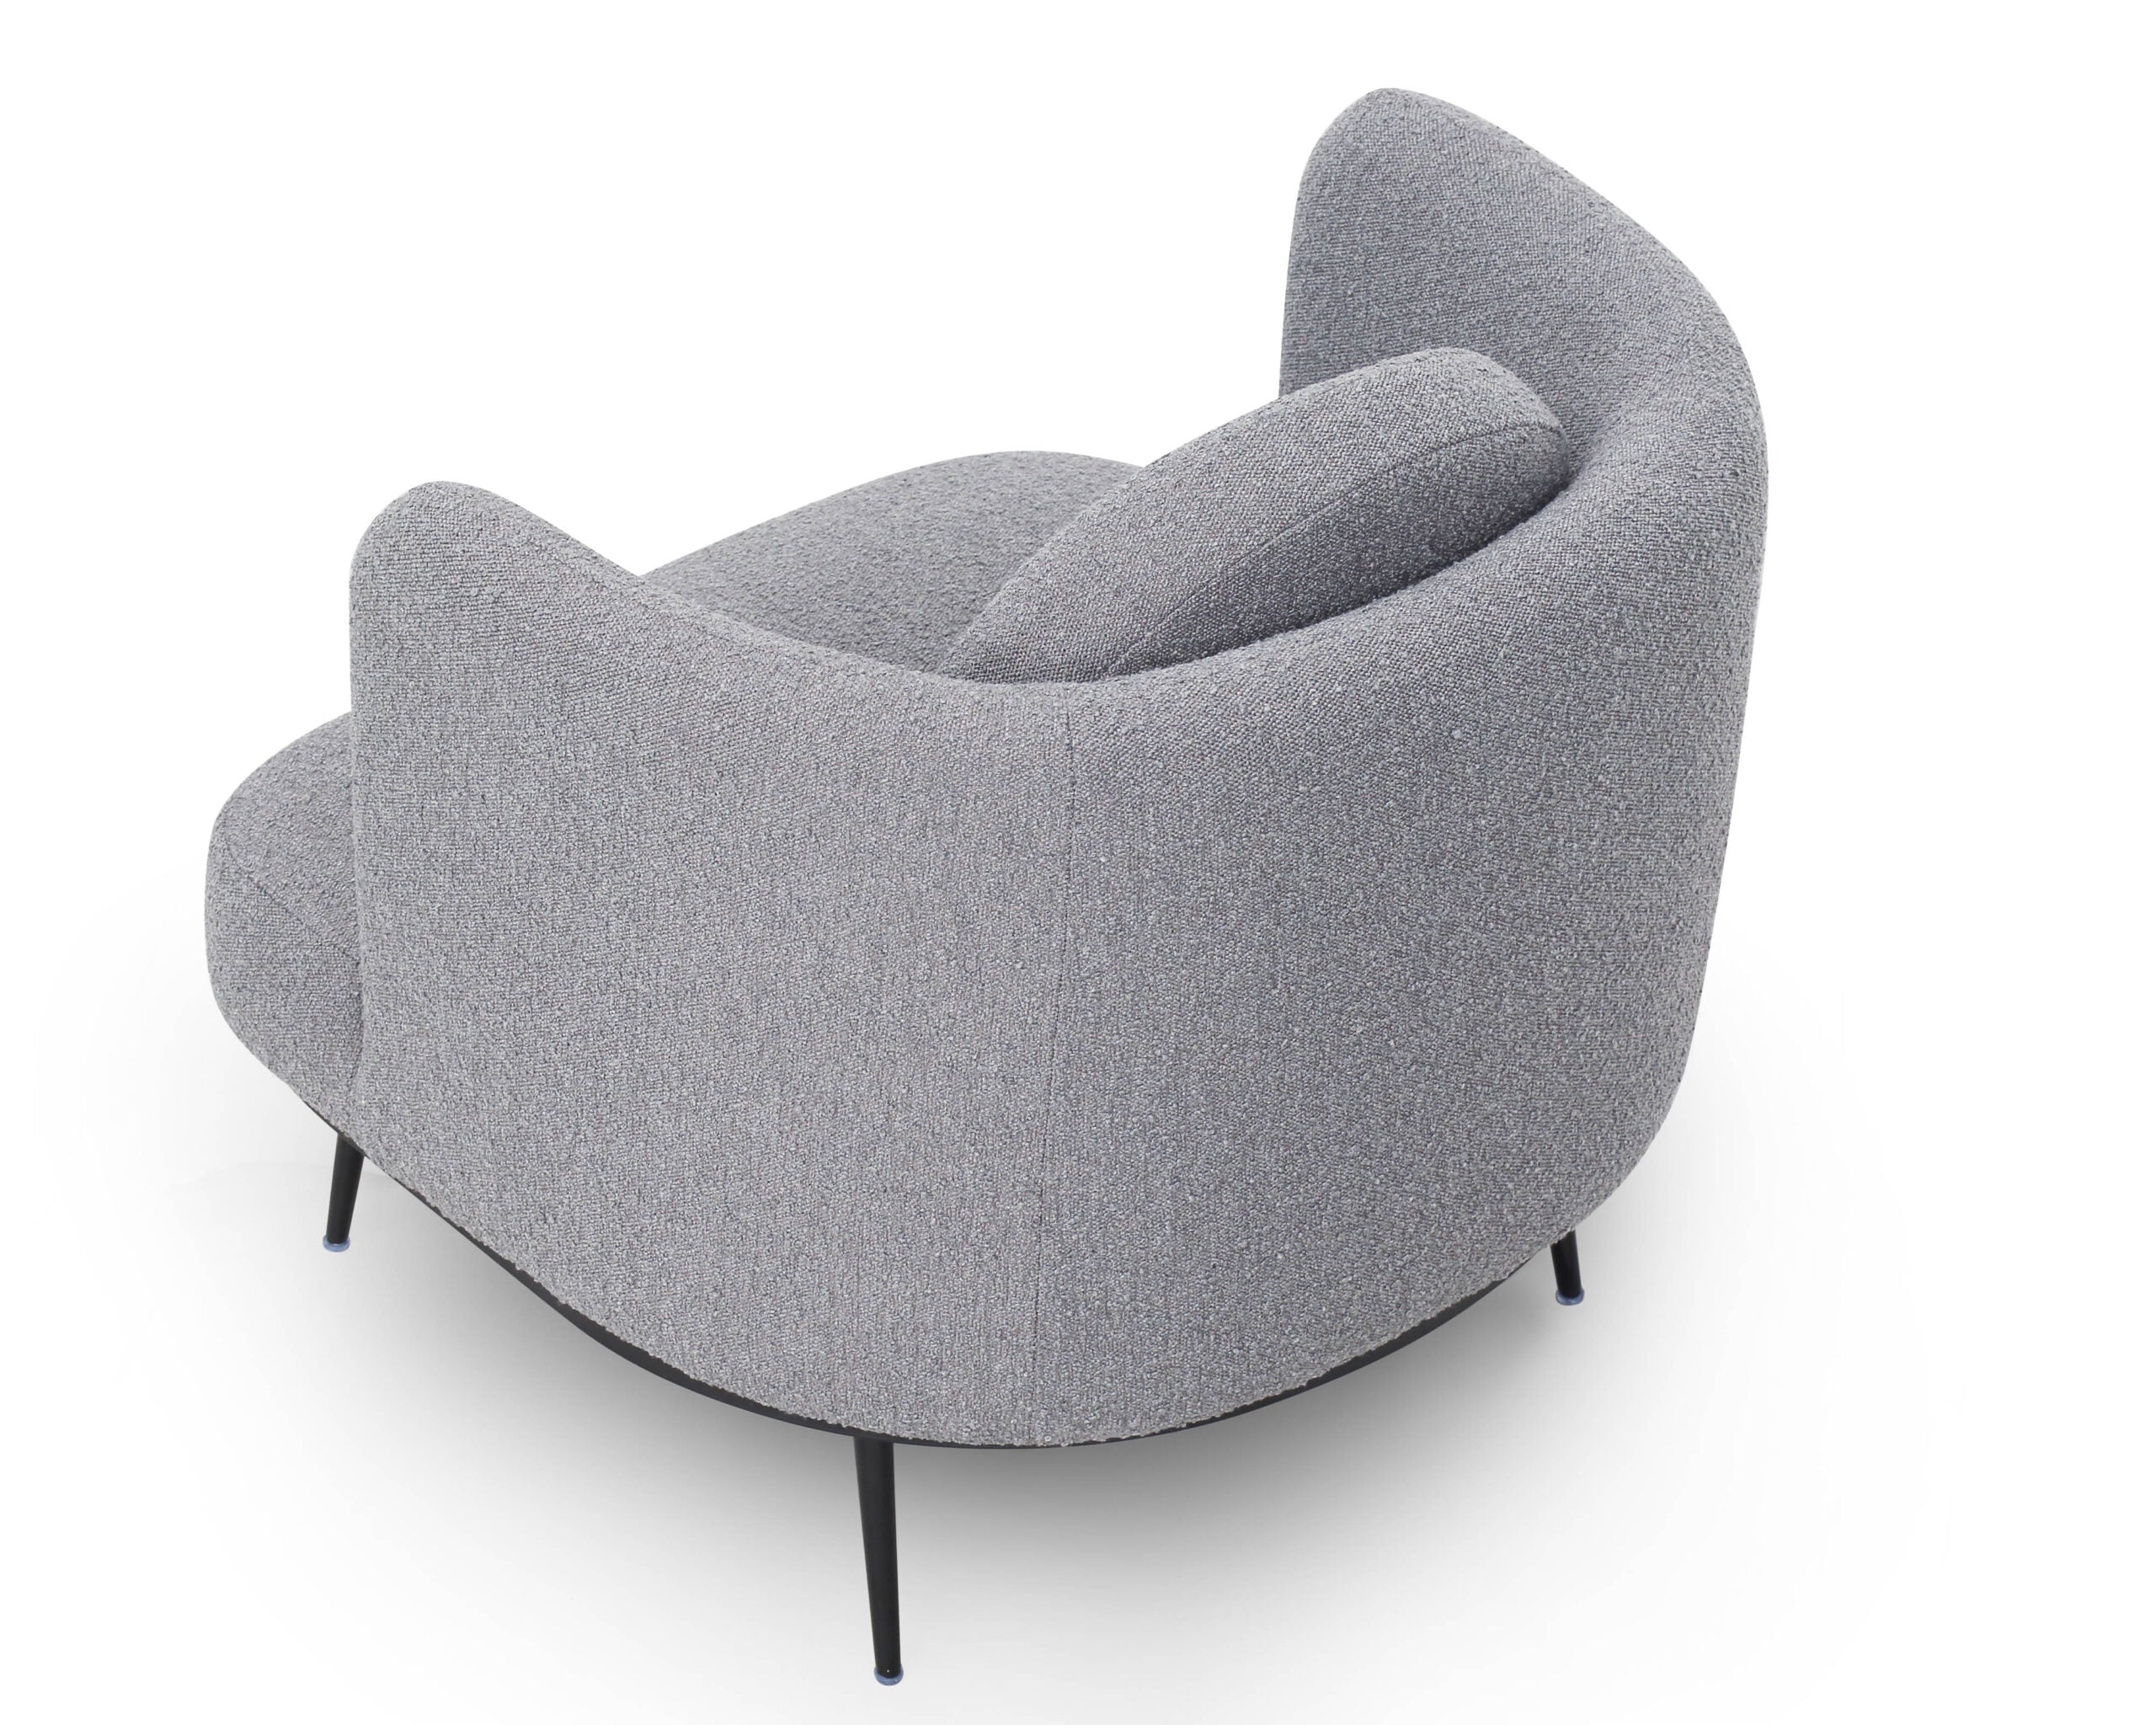 V lux occasional chair – boucle graphic grey